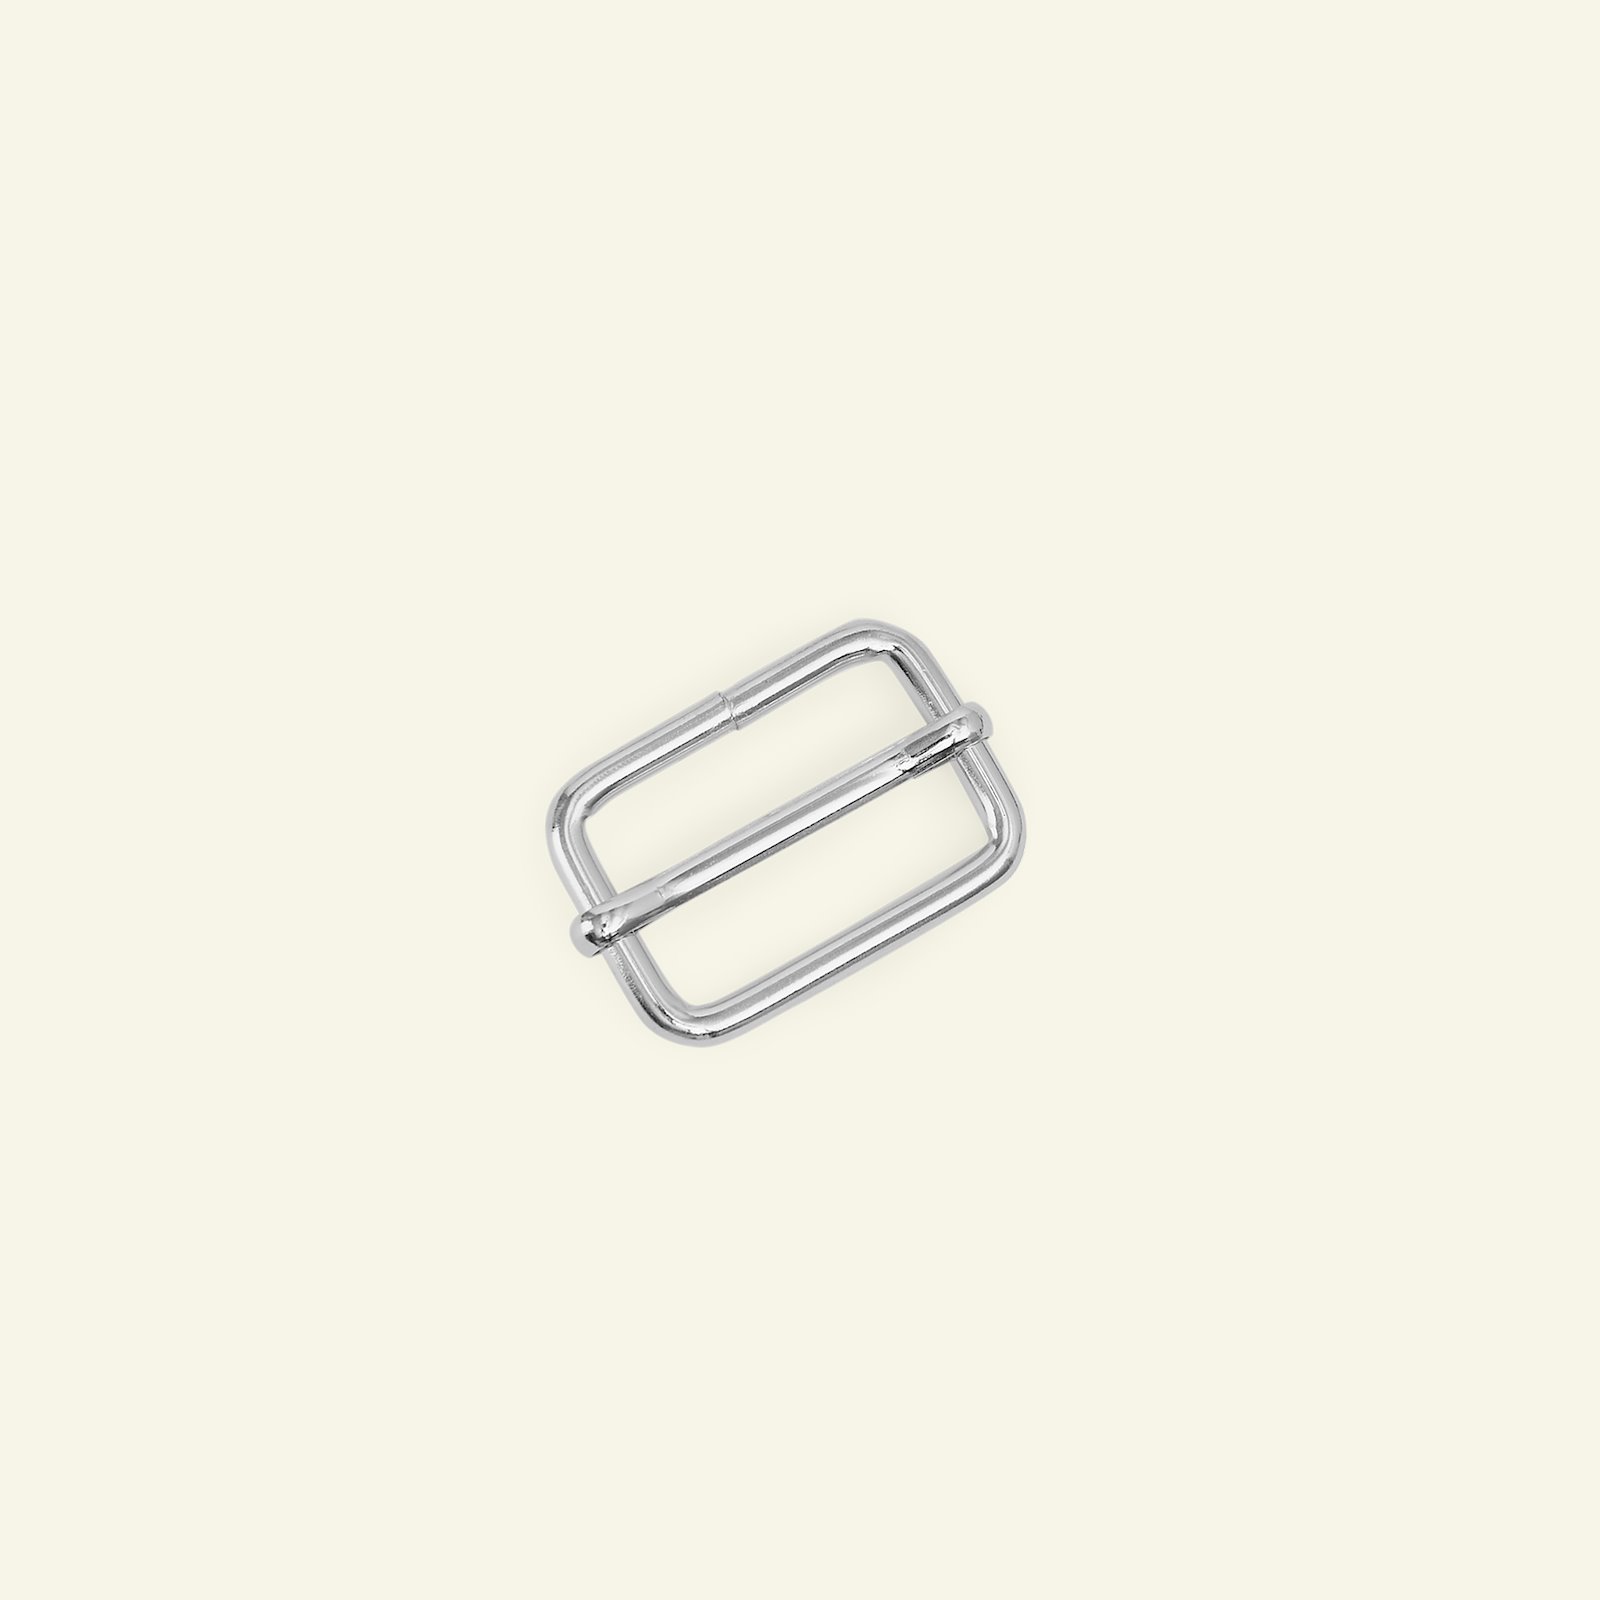 Buckle metal 32x20mm silver 1pc 45510_pack